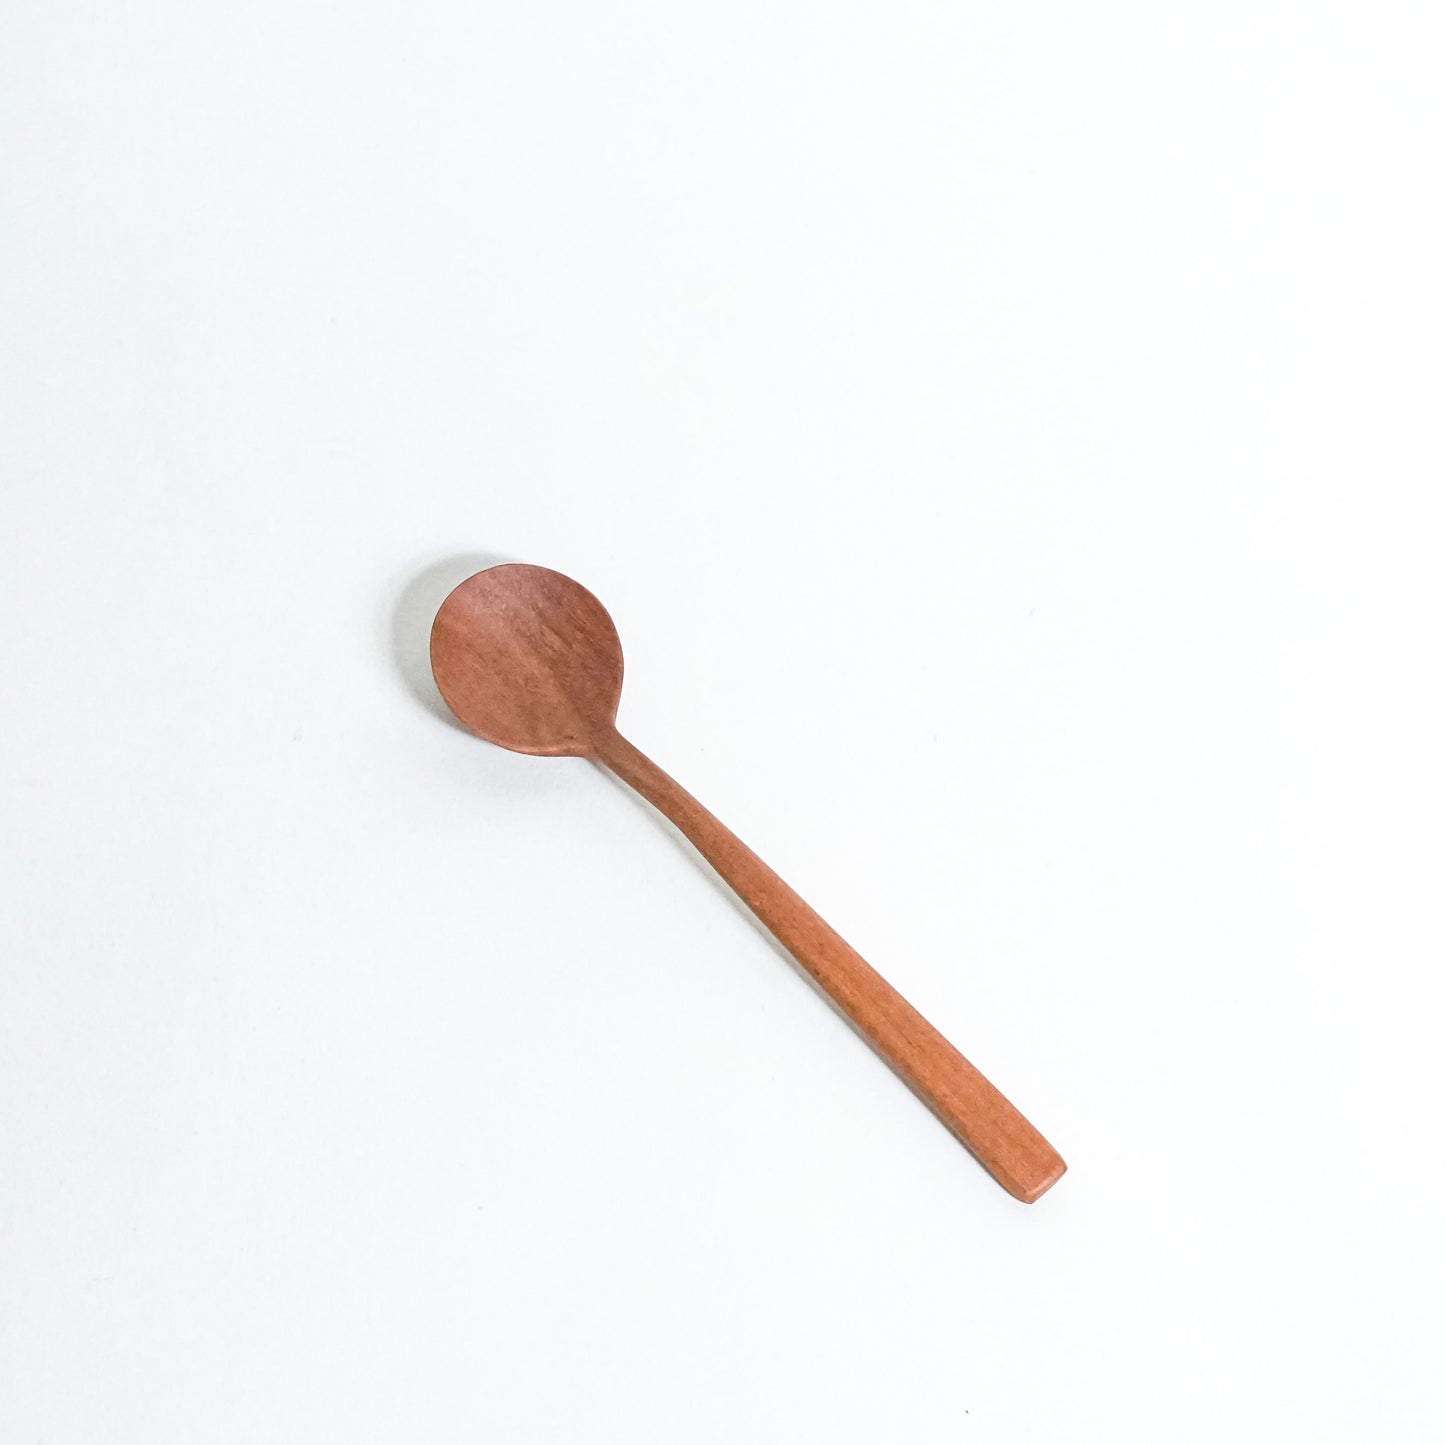 Natural Wood Cutlery